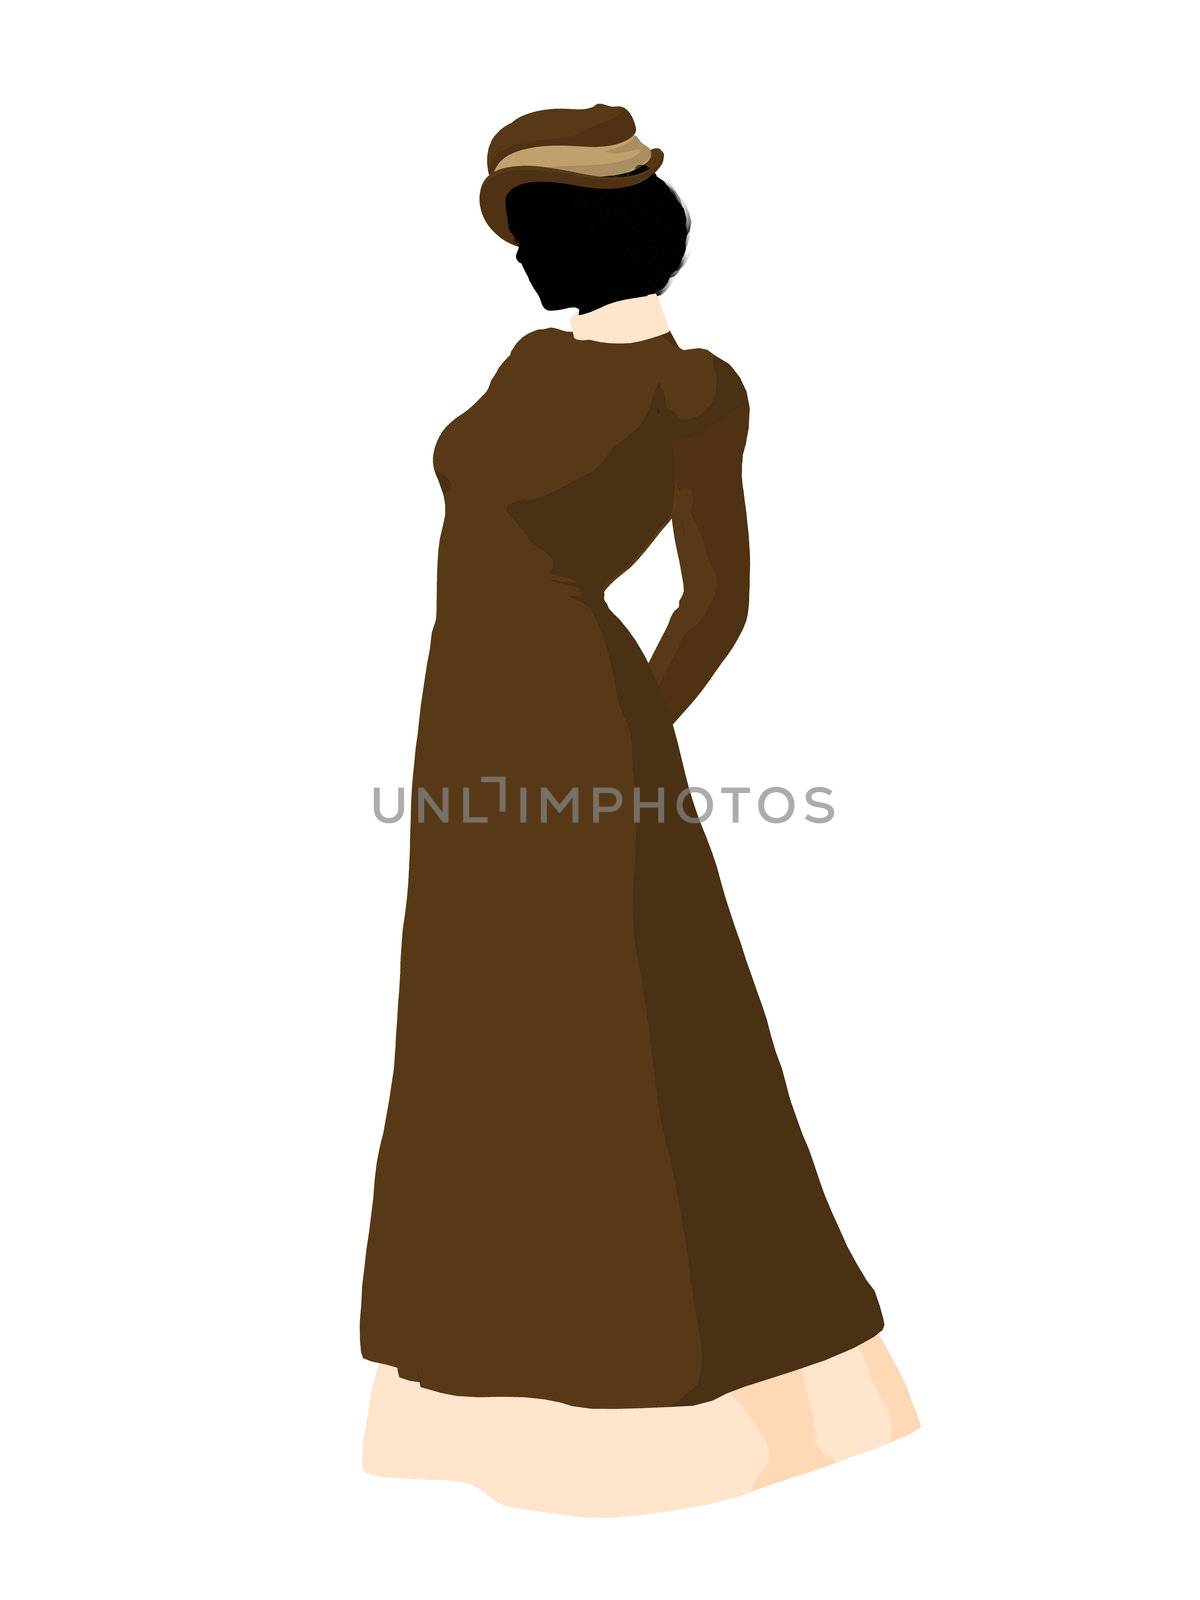 Victorian woman art illustration silhouette on a white background